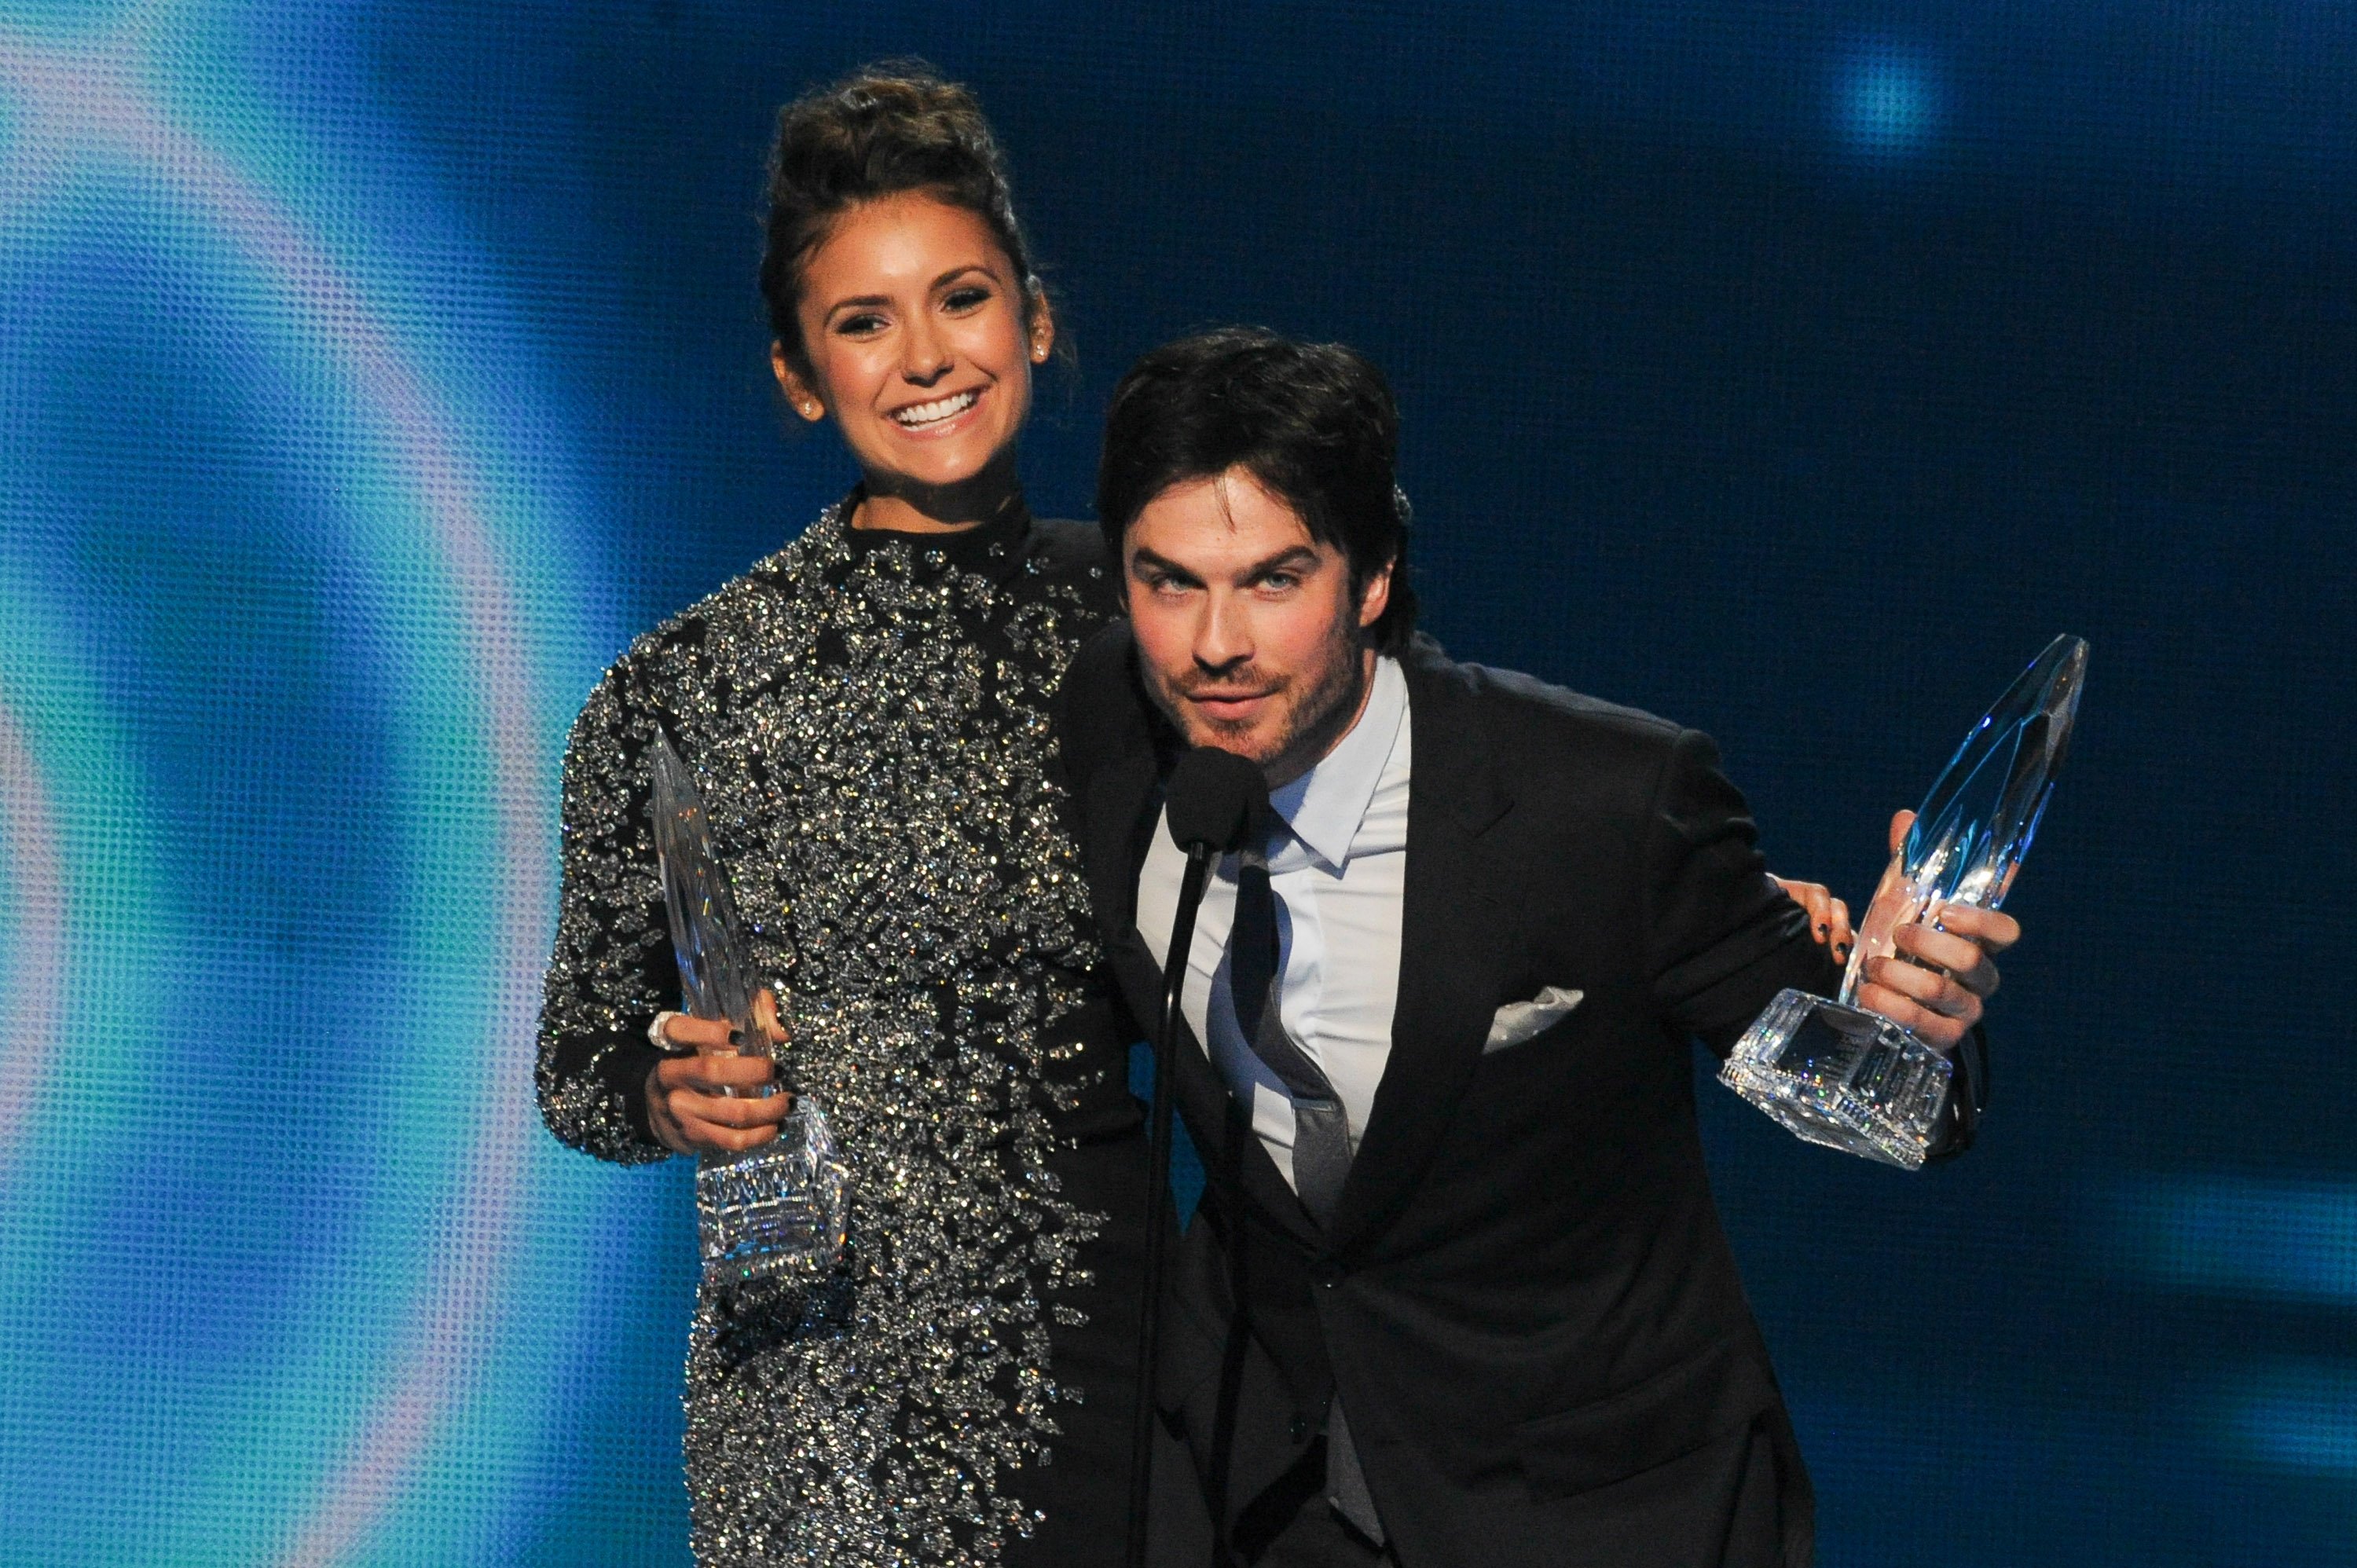 Nina Dobrev and Ian Somerhalder, who played Elena and Damon in 'The Vampire Diaries' series finale, accept an award onstage. Dobrev wears a diamond-studded long-sleeved black dress. Somerhalder wears a black suit over a white button-up shirt and gray tie.